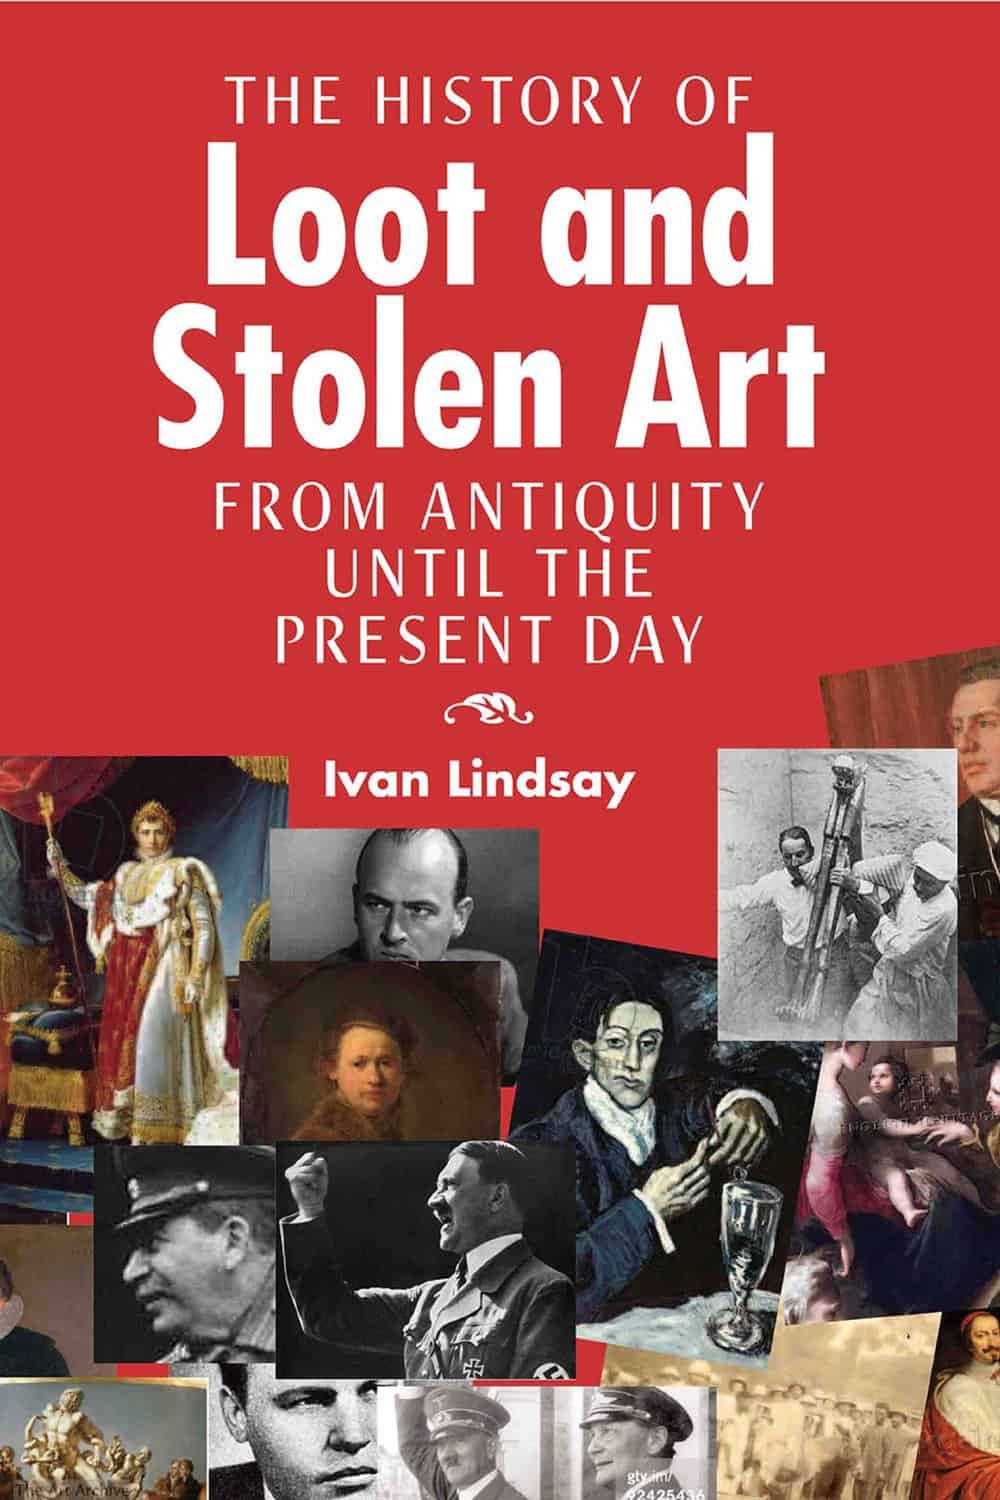 The History of Loot and Stolen Art by Ivan Lindsay